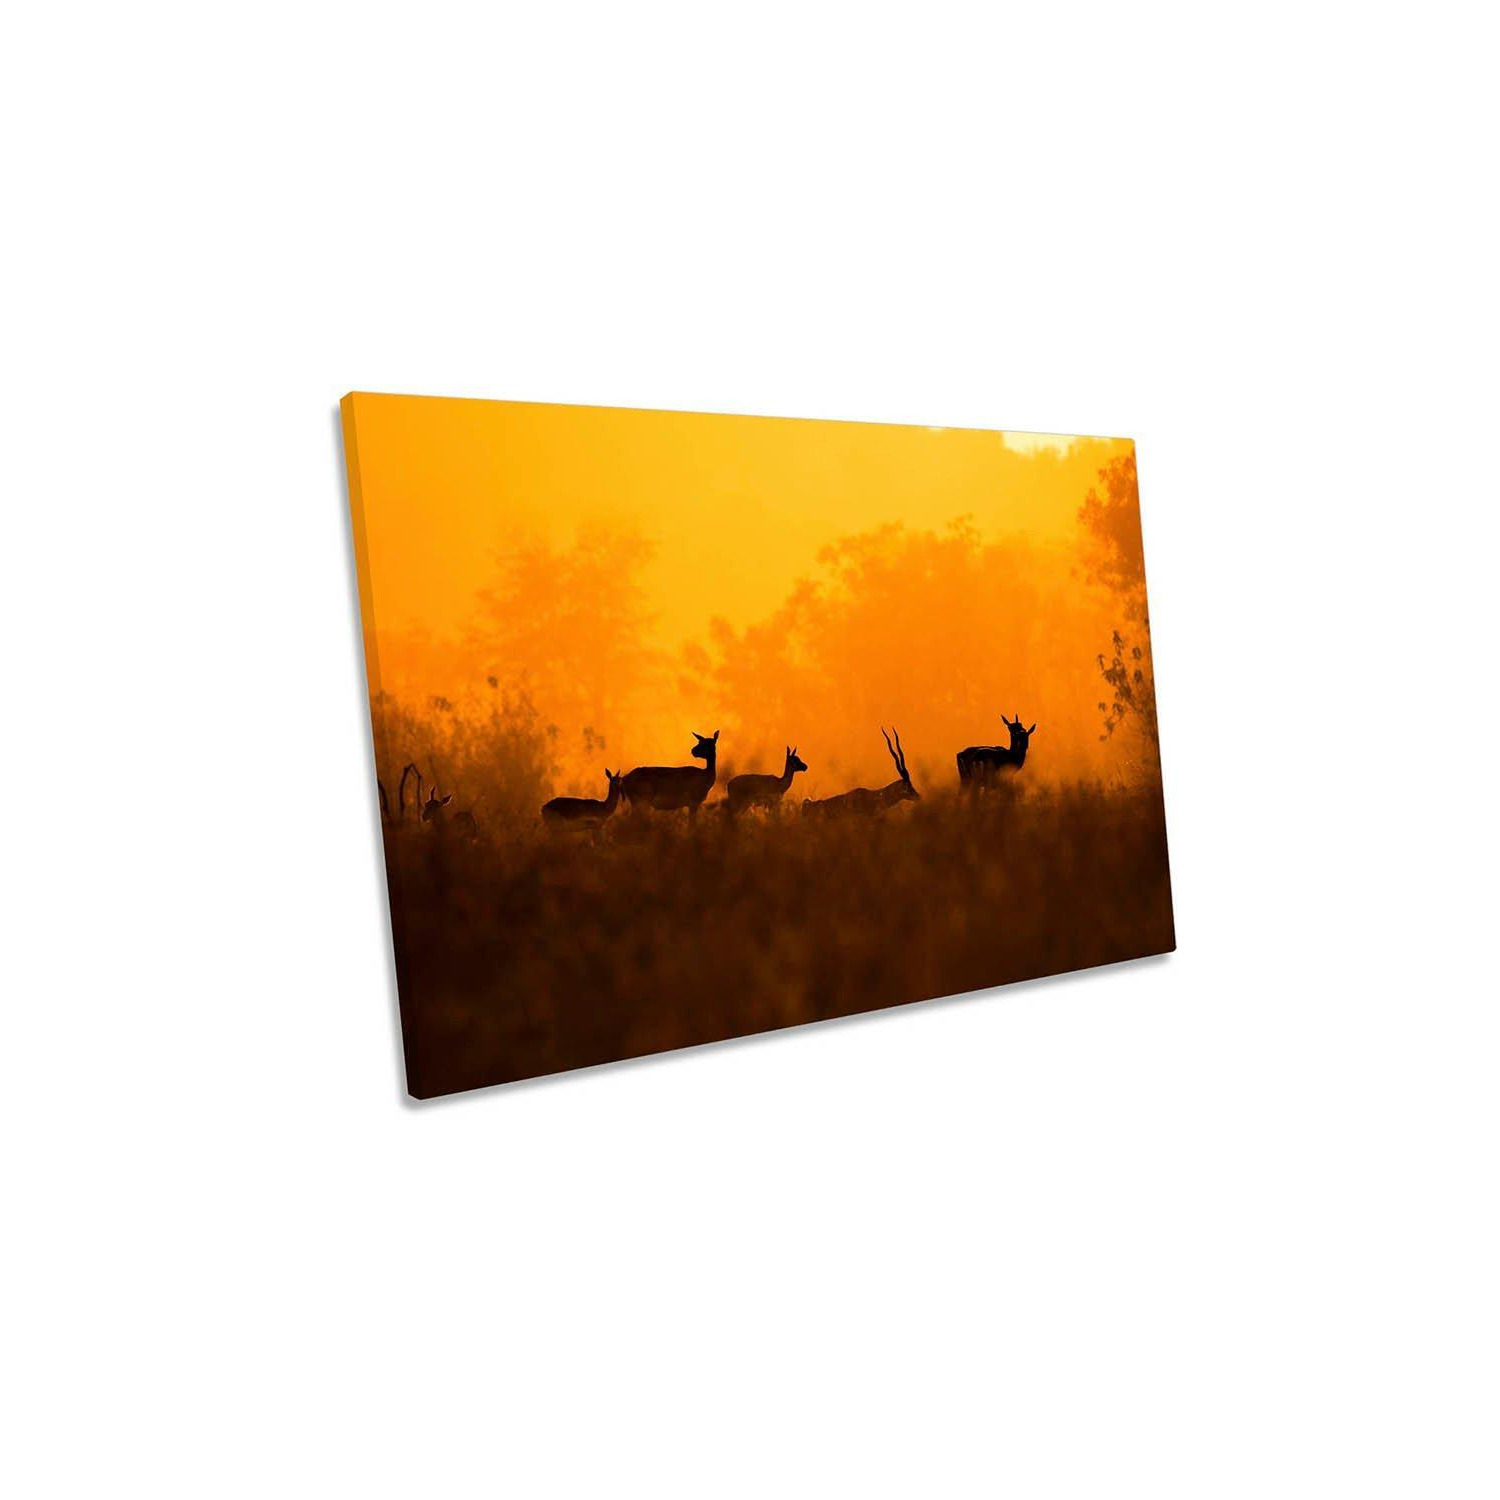 An Evening in Nature Antelopes Orange Canvas Wall Art Picture Print - image 1